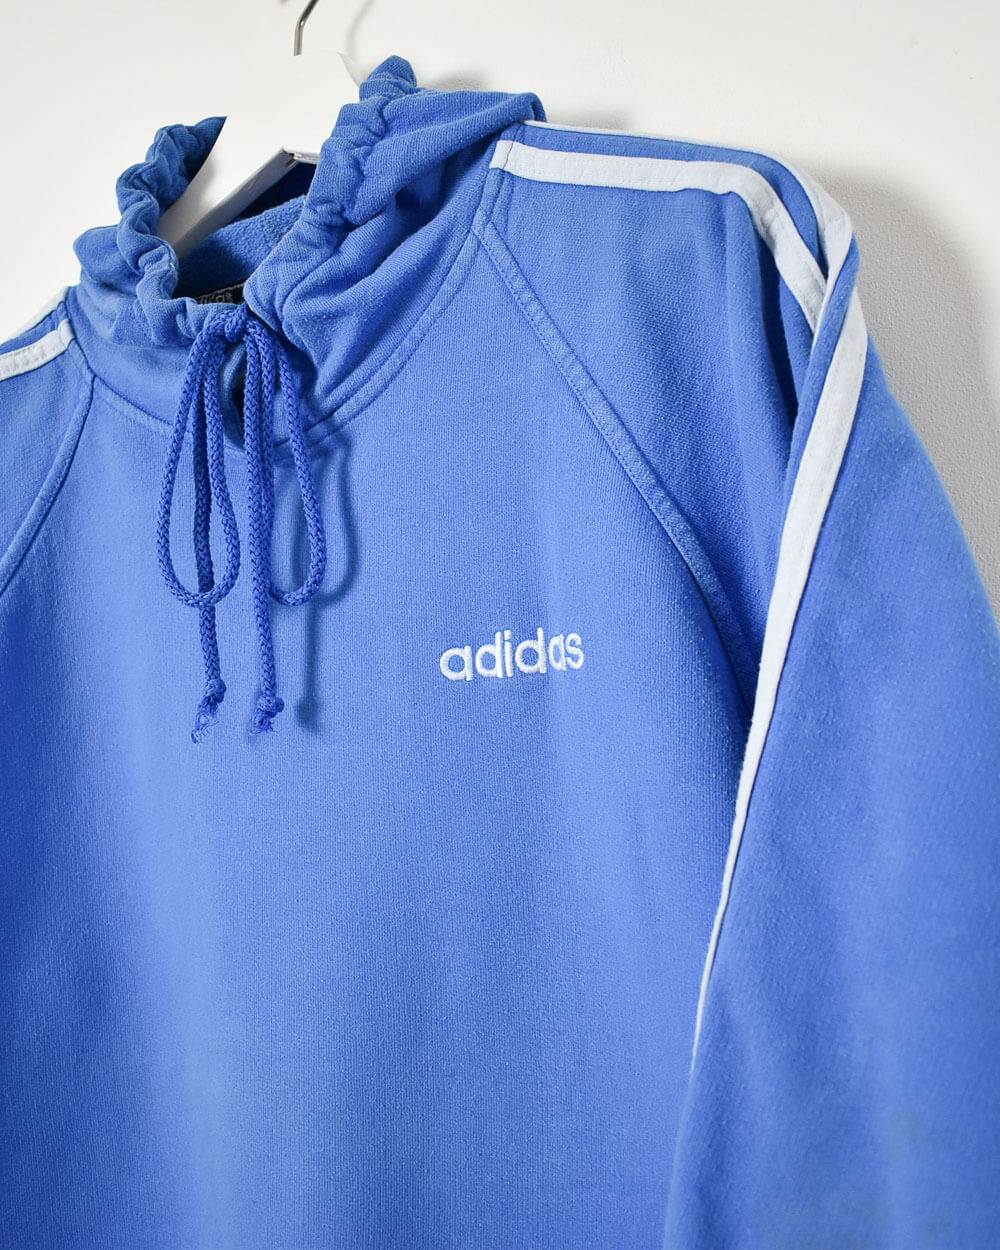 Adidas Hoodie - Small - Domno Vintage 90s, 80s, 00s Retro and Vintage Clothing 